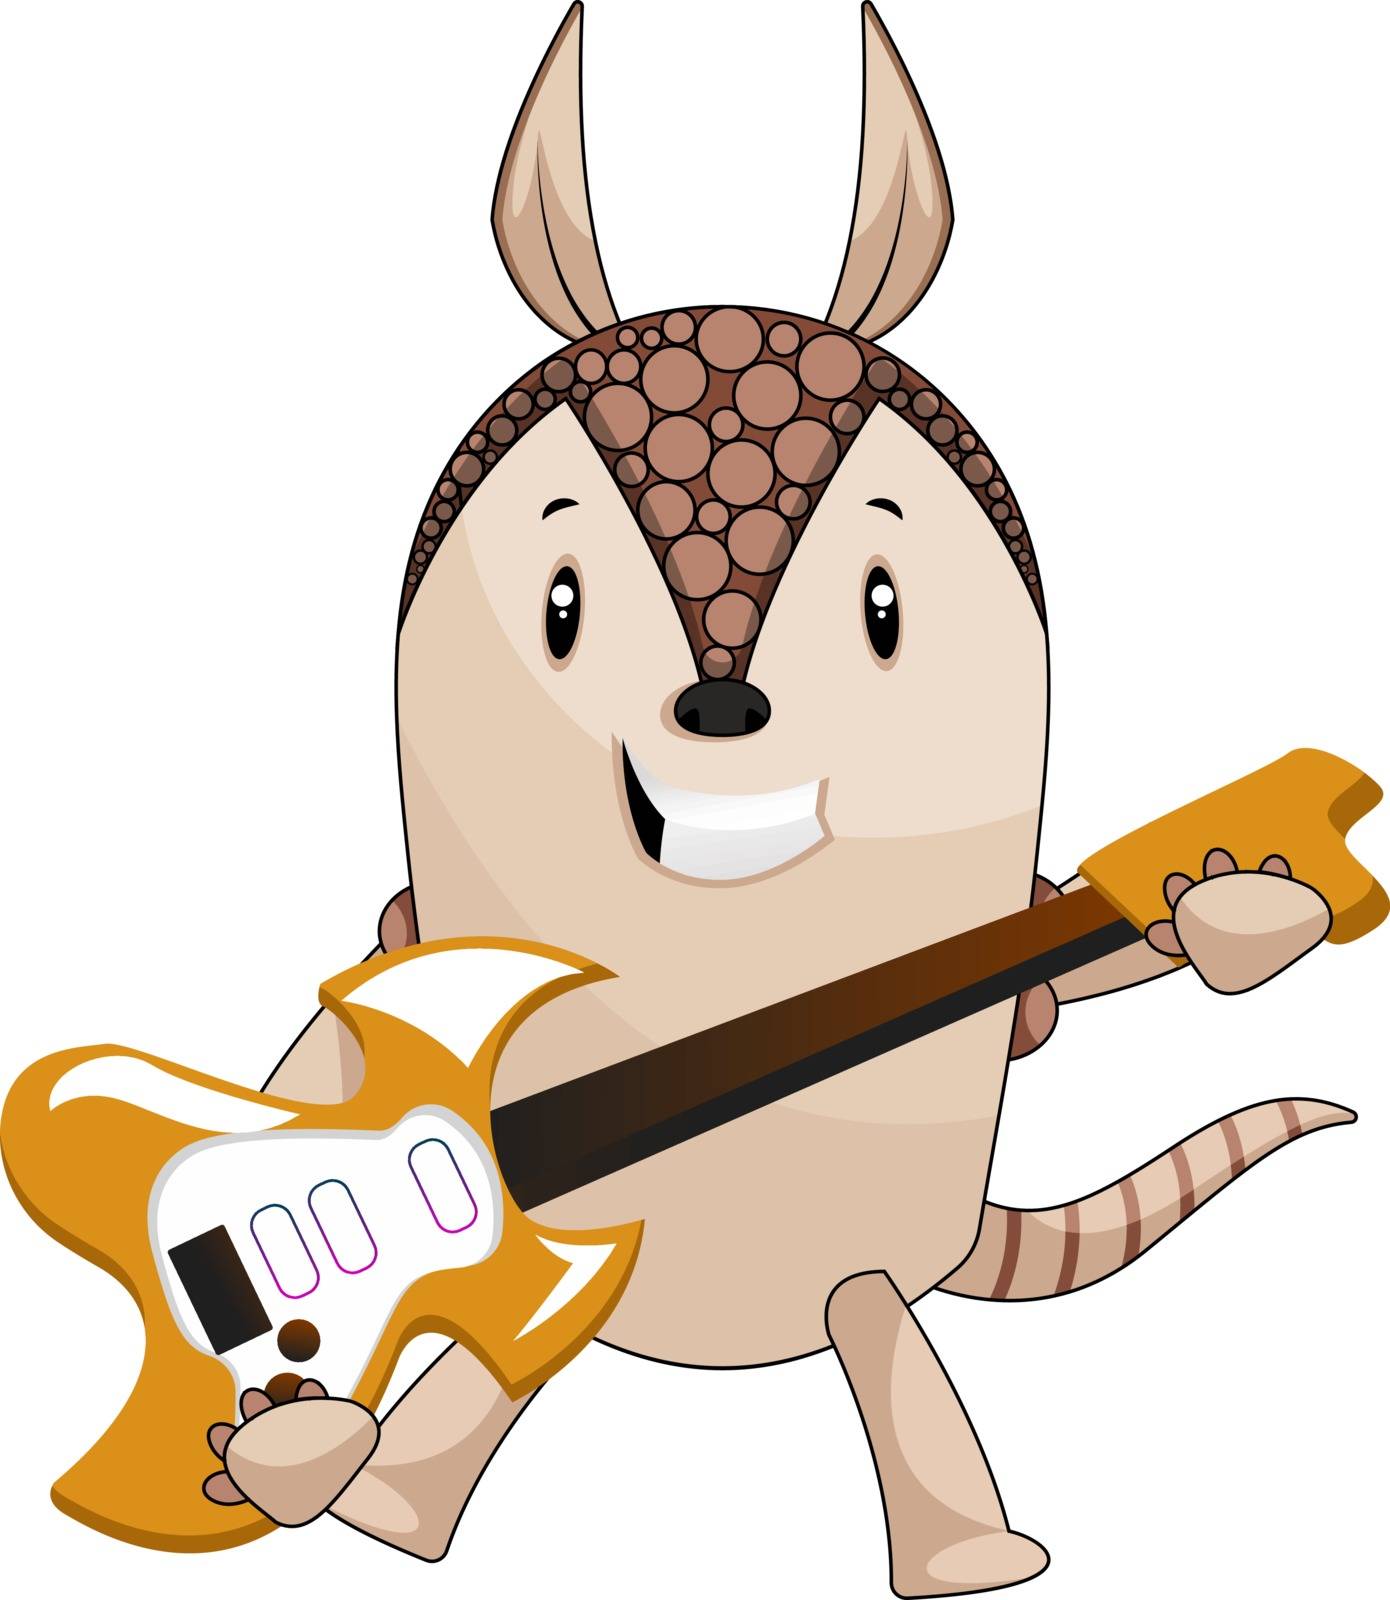 Armadillo playing guitar, illustration, vector on white background.